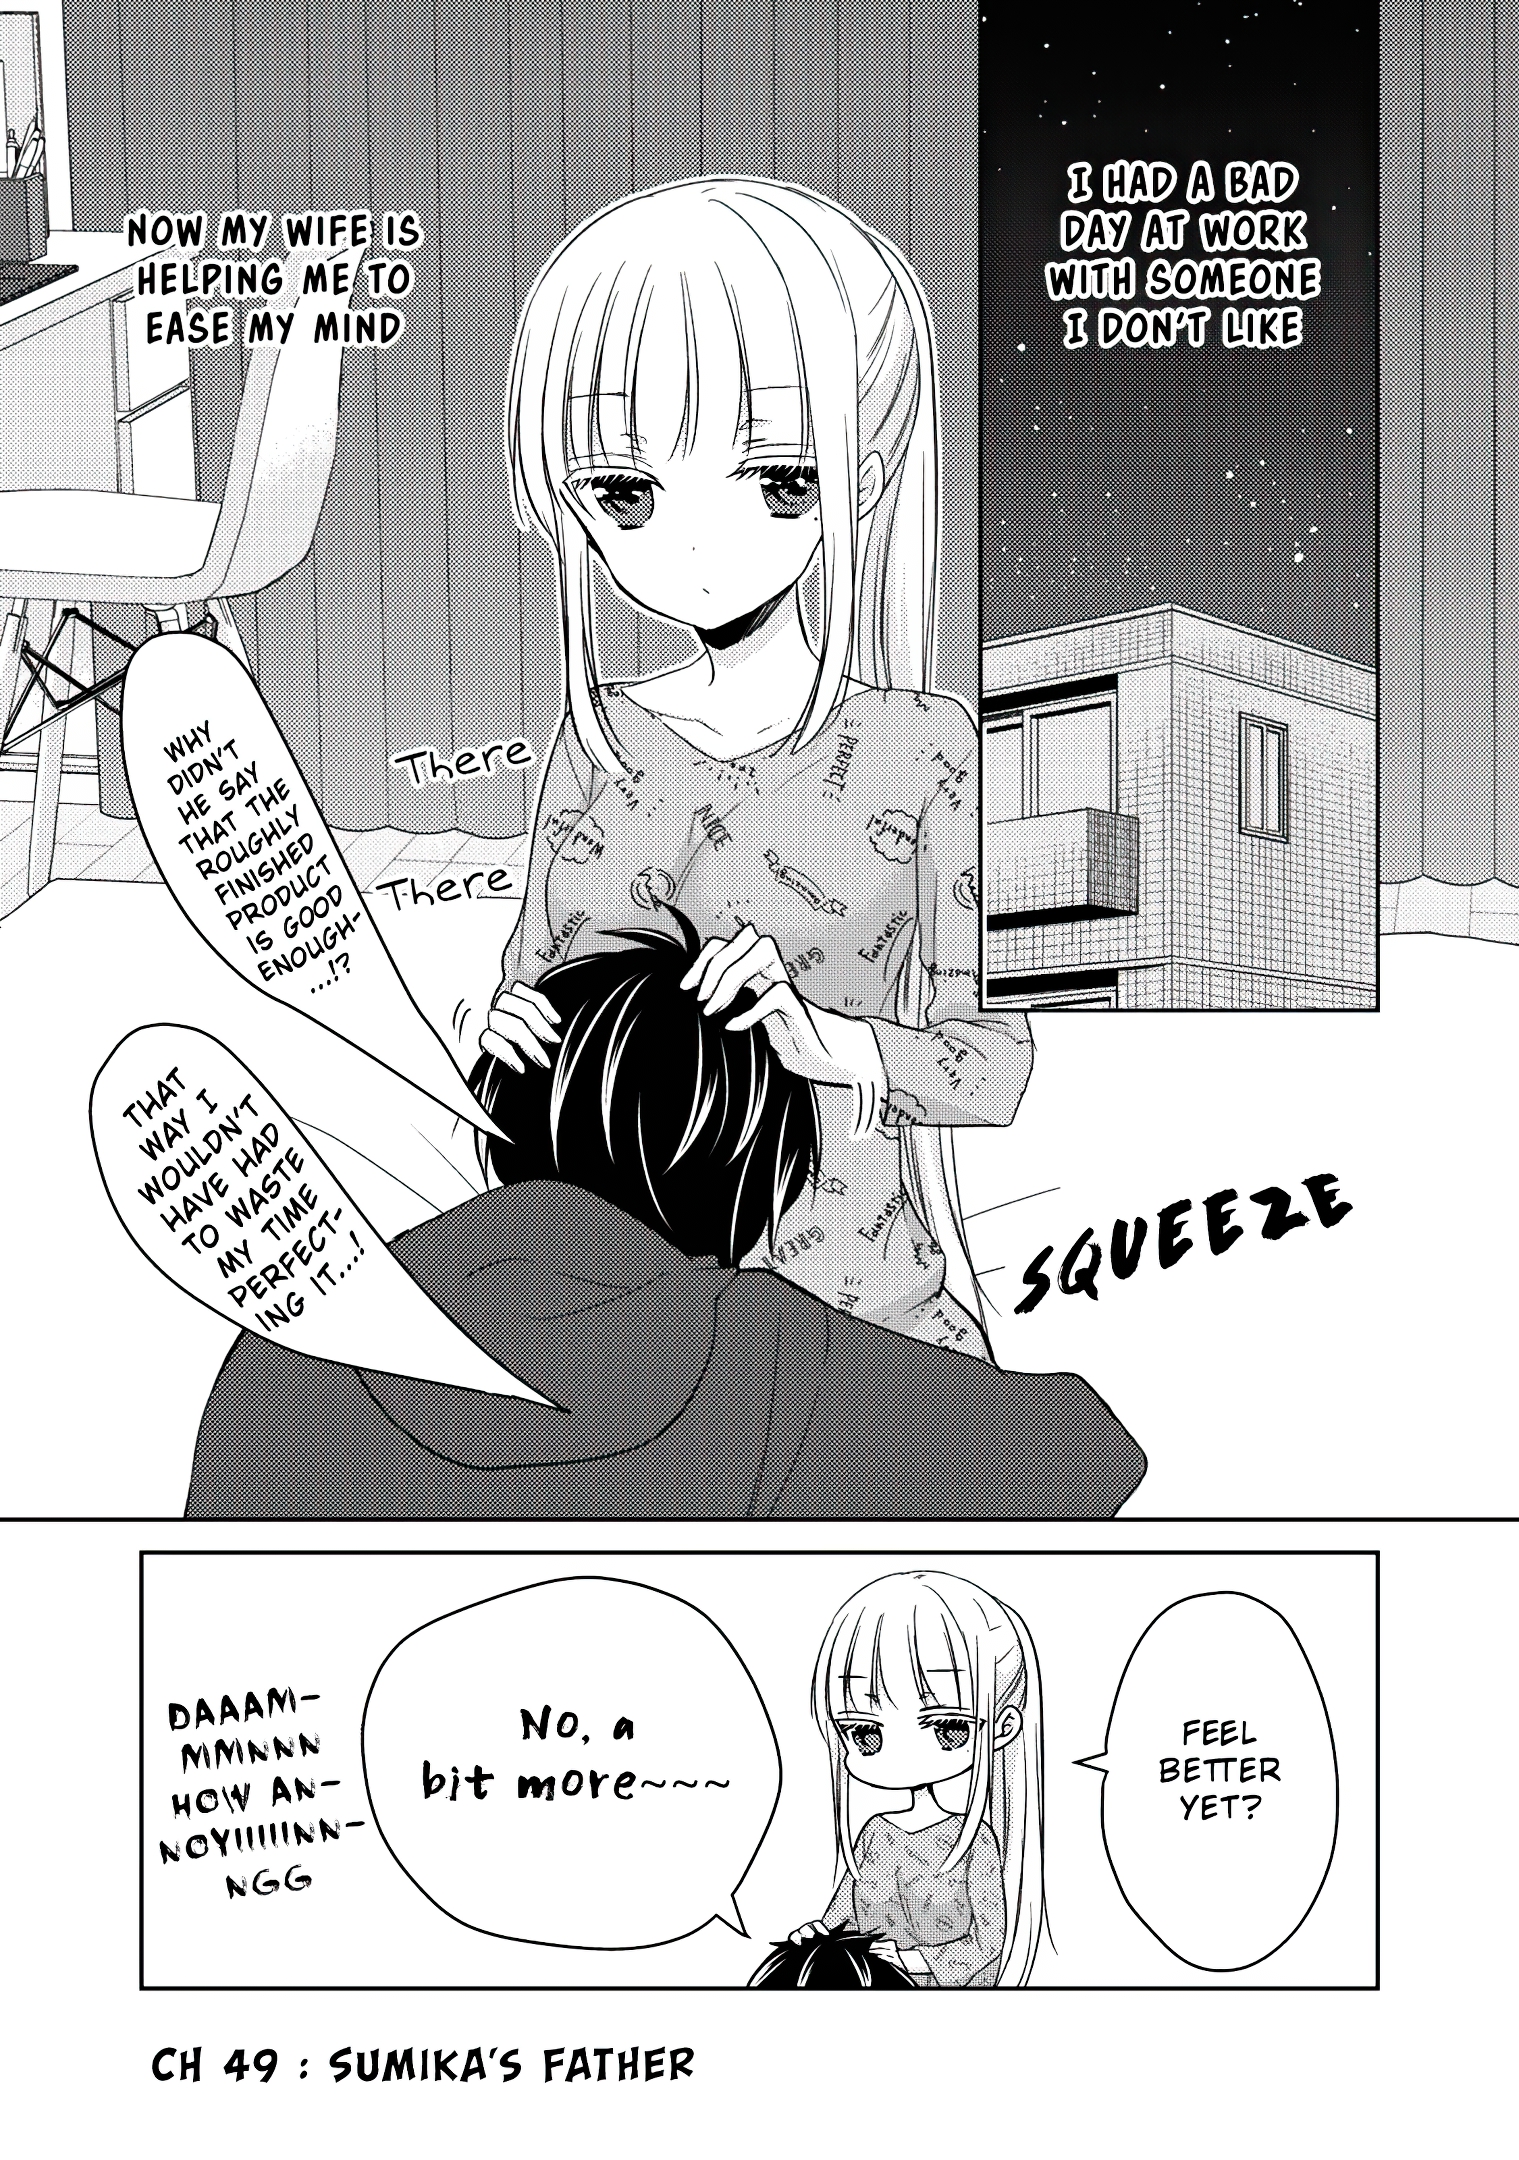 We May Be An Inexperienced Couple But... Vol.6 Chapter 49: Sumika's Father - Picture 2